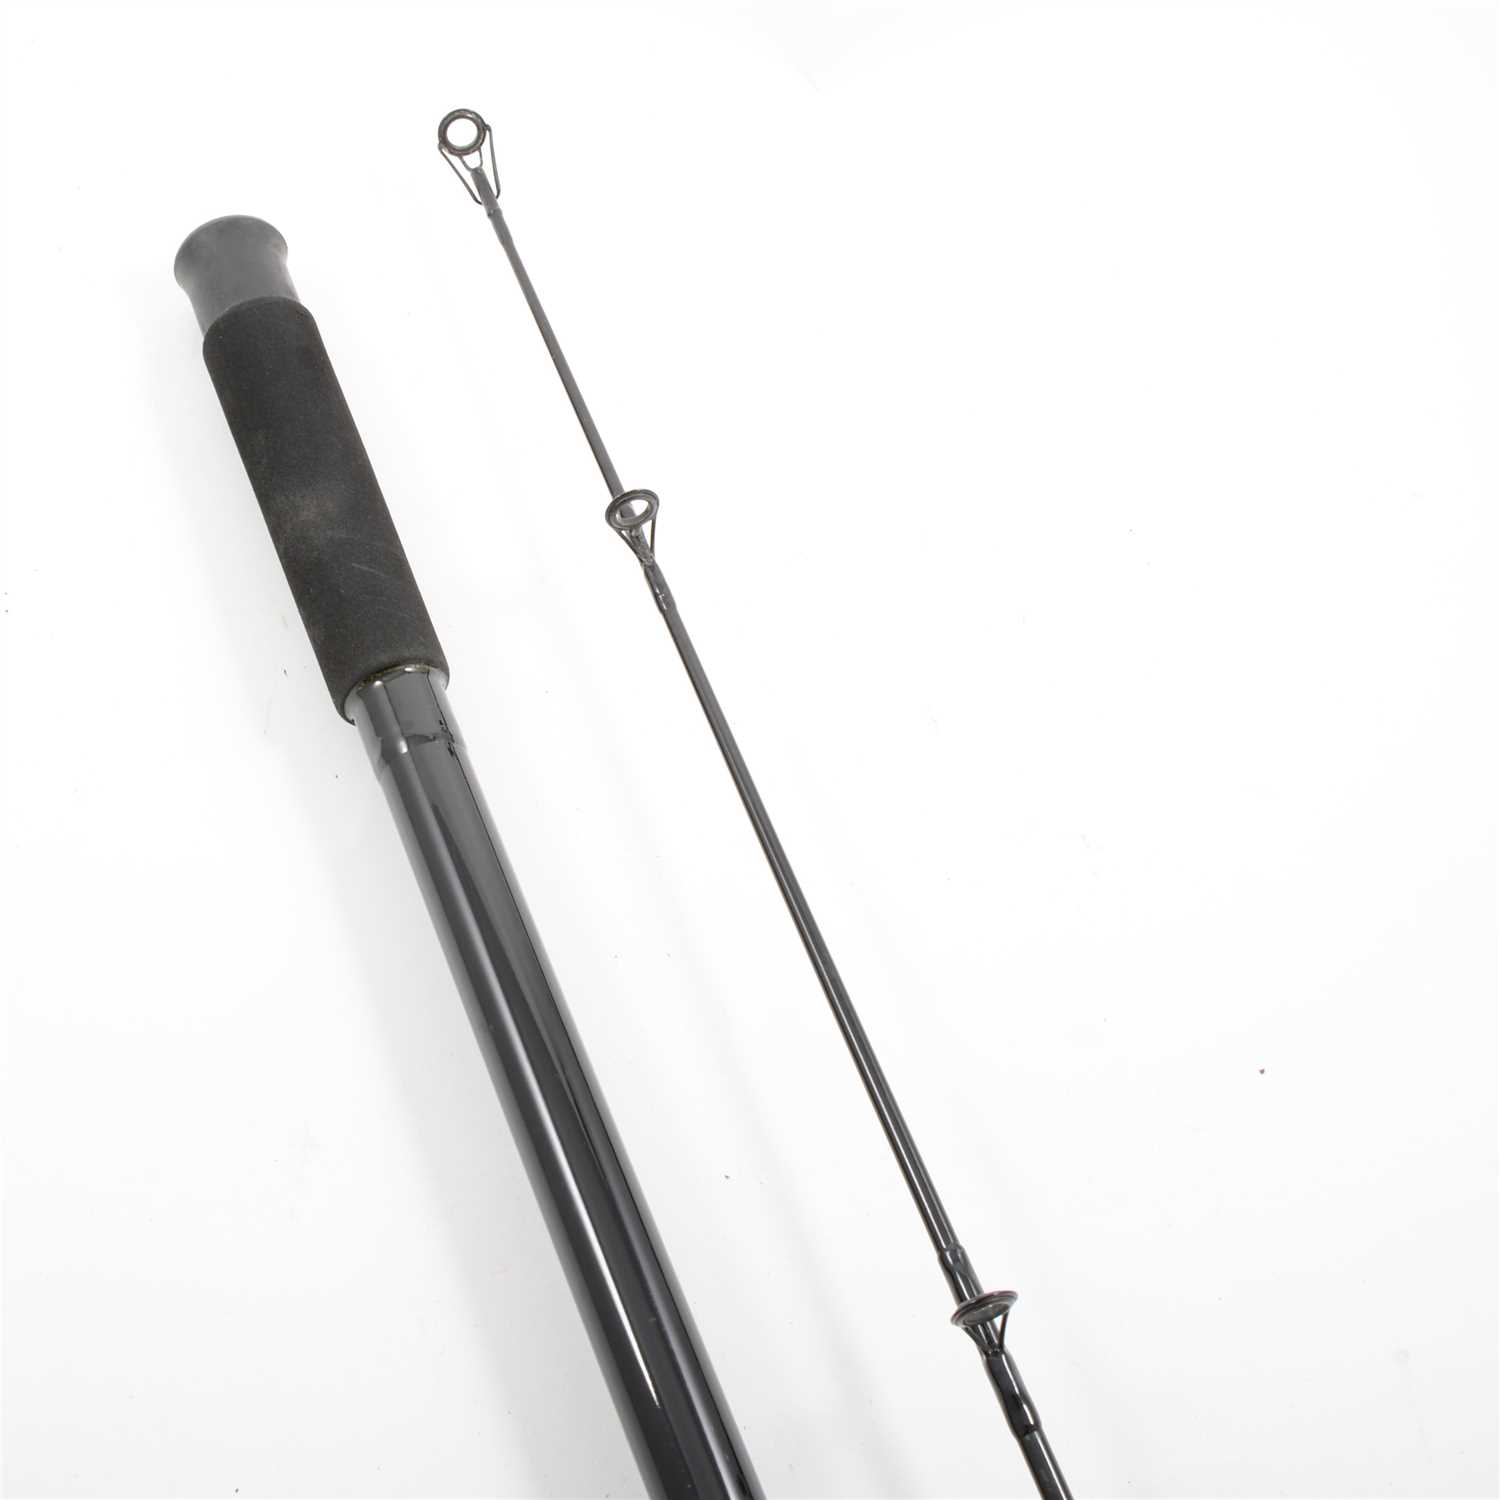 Lot 86 - Fishing: Hardy Matchmaker 13ft carbon-fibre fishing rod, and two other carbon-fibre rods